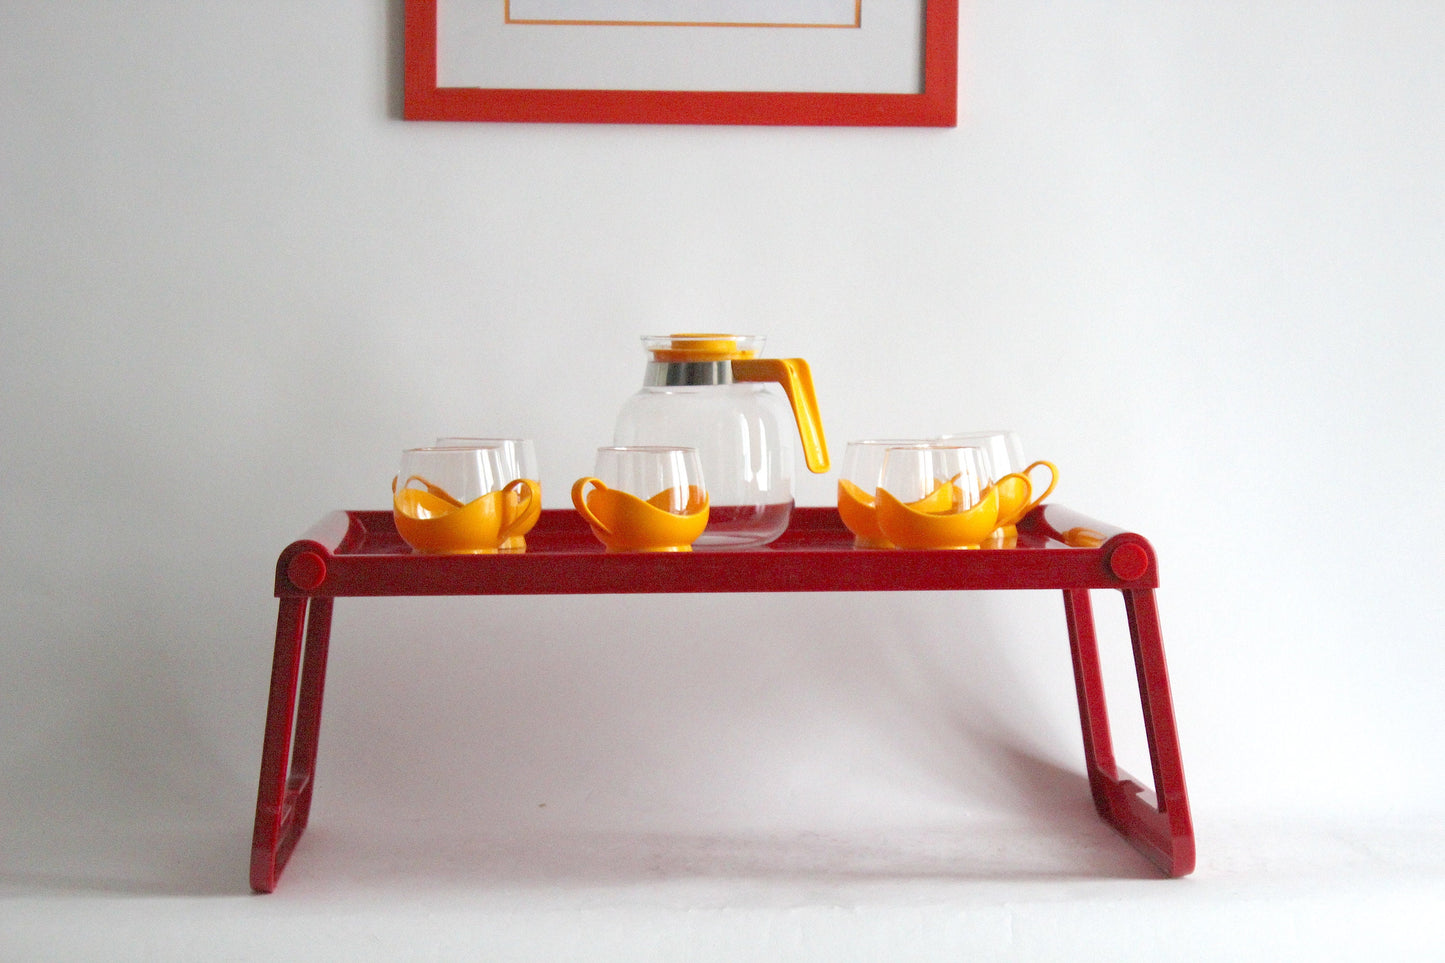 Vintage red Luigi Massoni for Guzzini bed foldable tray - folding table - space age - 1970s/1980s